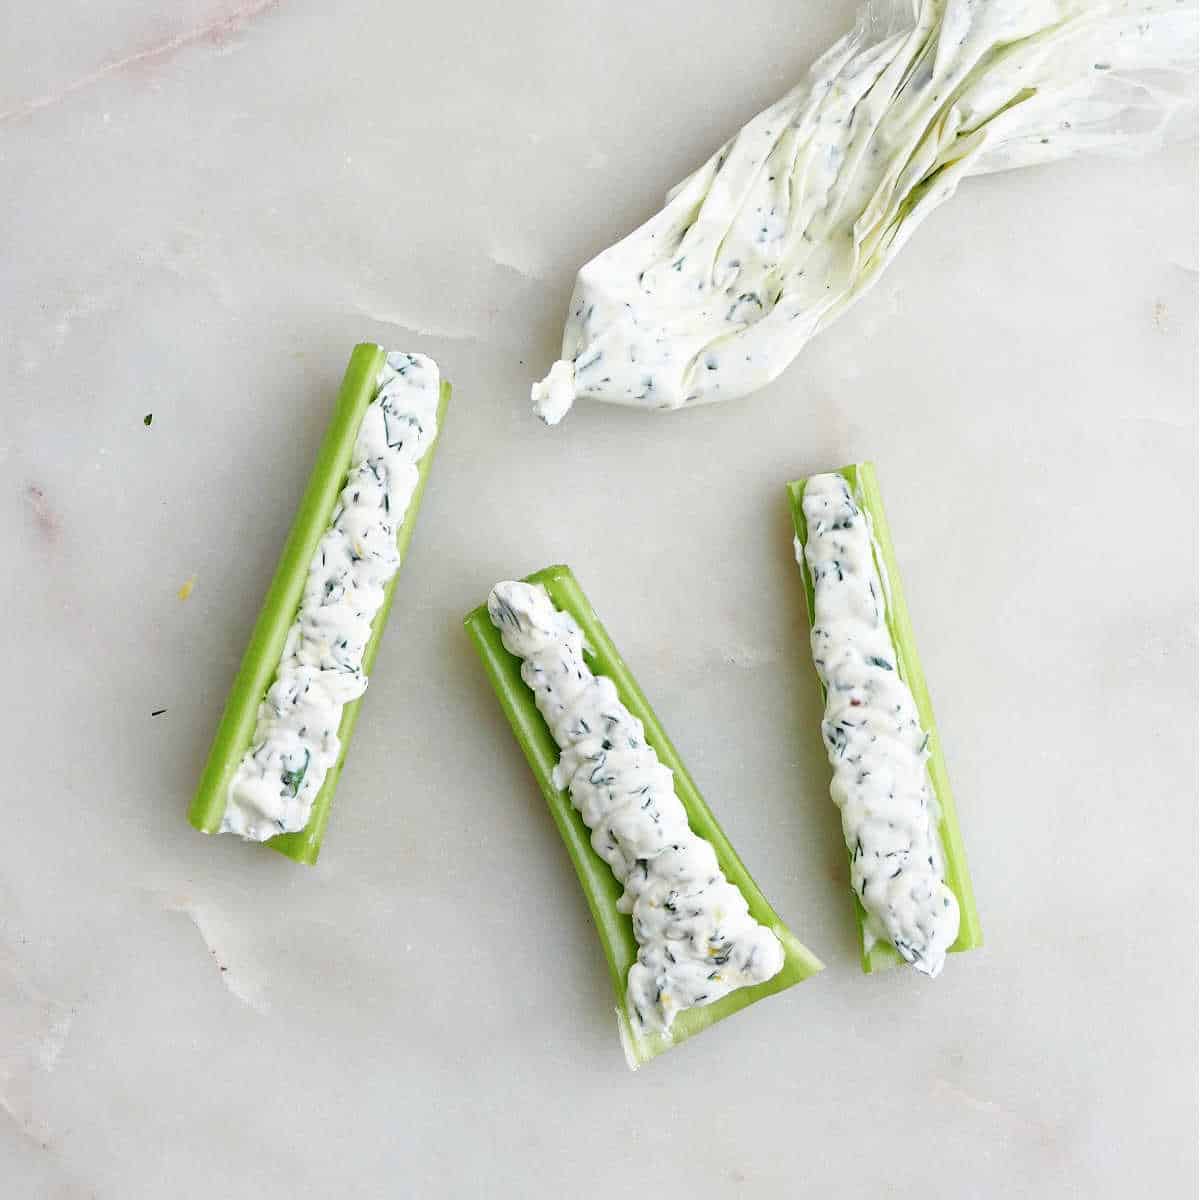 mascarpone cheese being piped into celery sticks on a counter